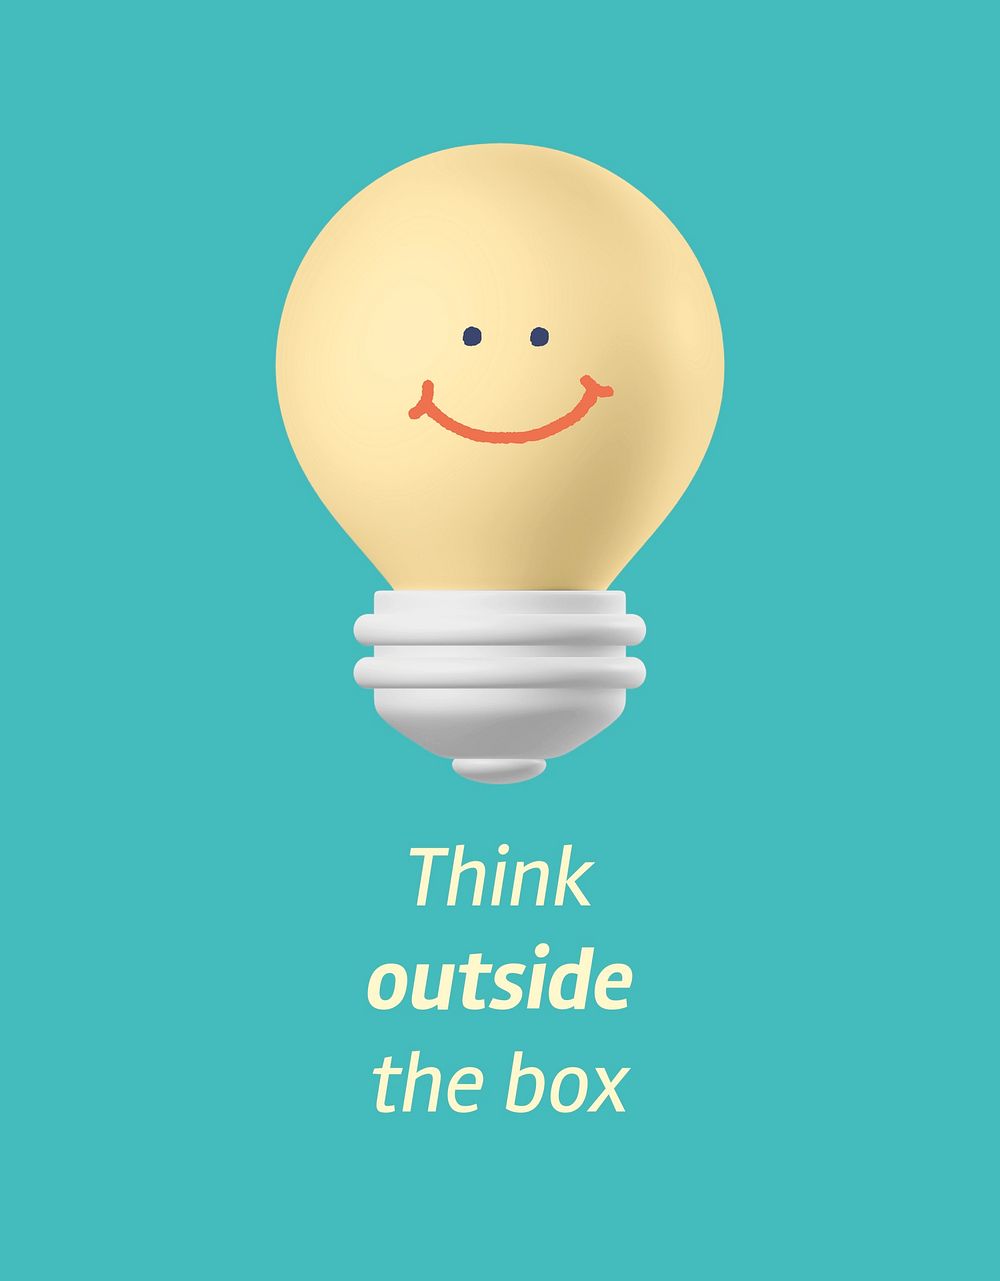 Smiling light bulb flyer template, think outside the box quote vector